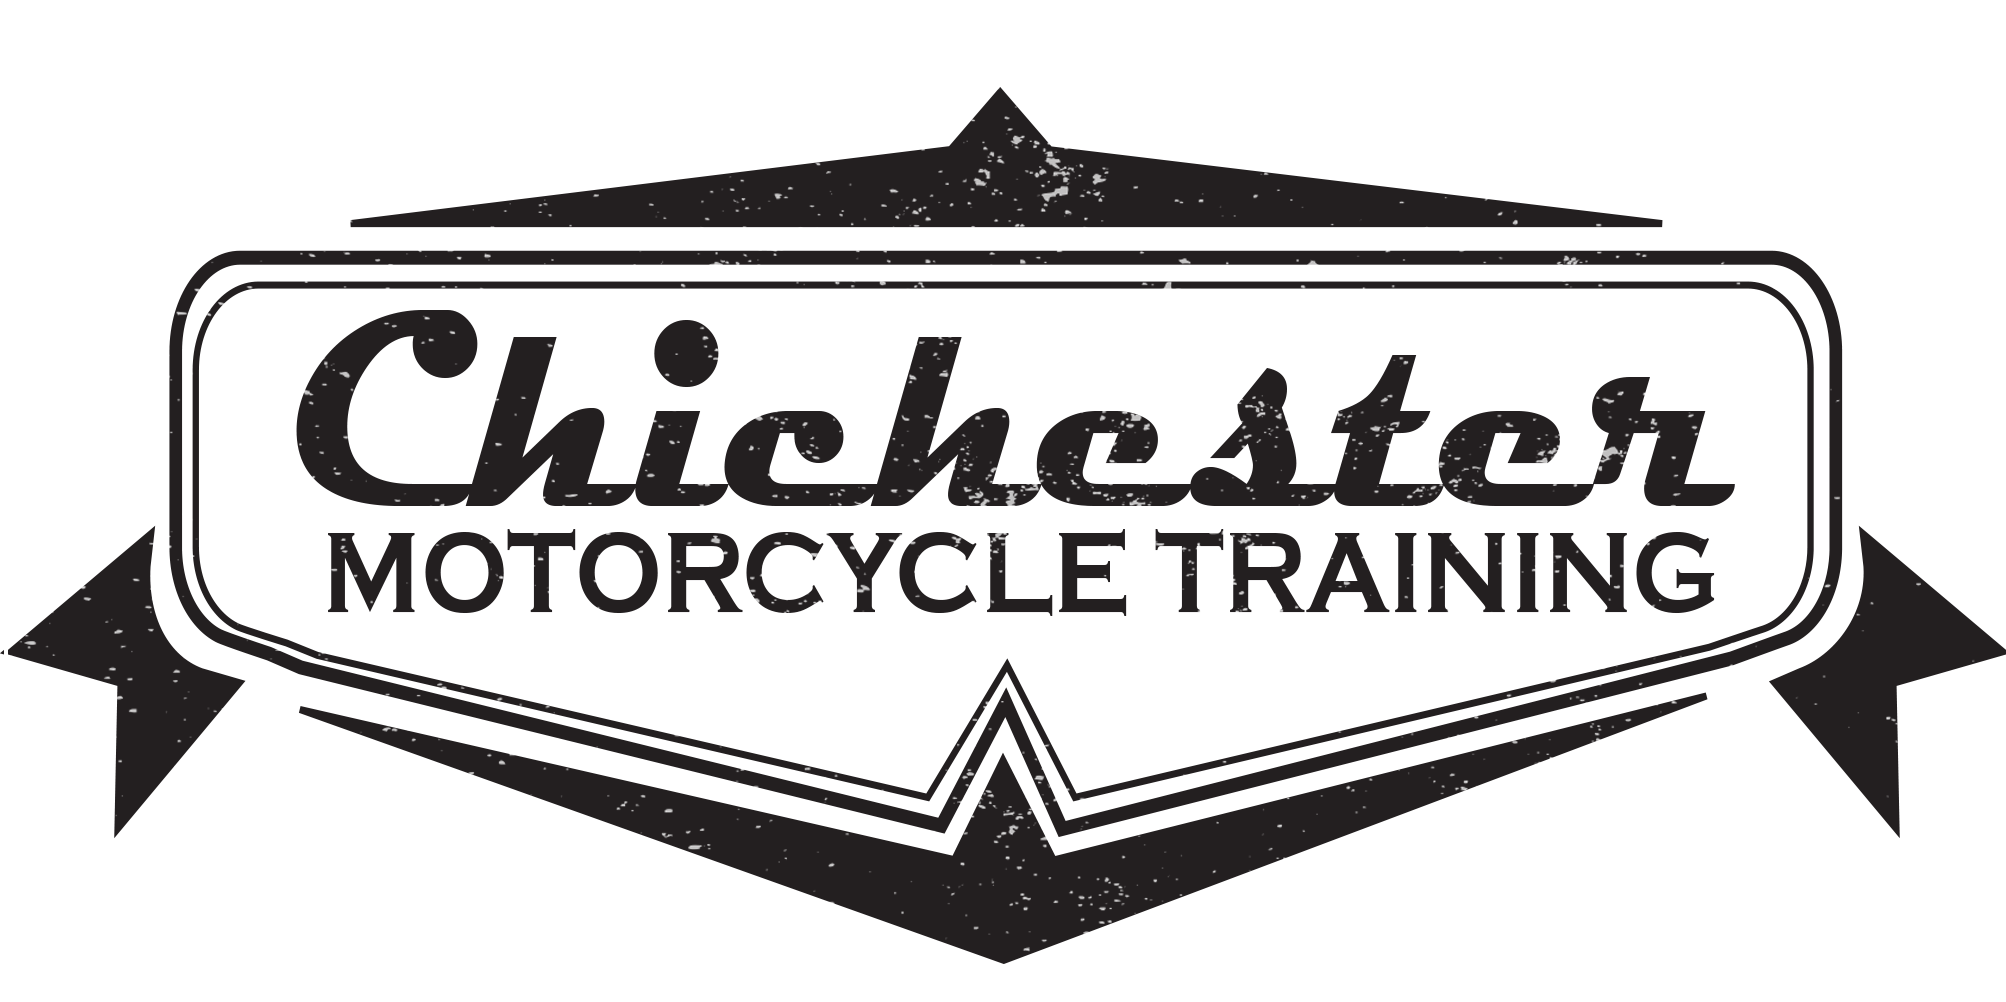 Chichester Motorcycle Training